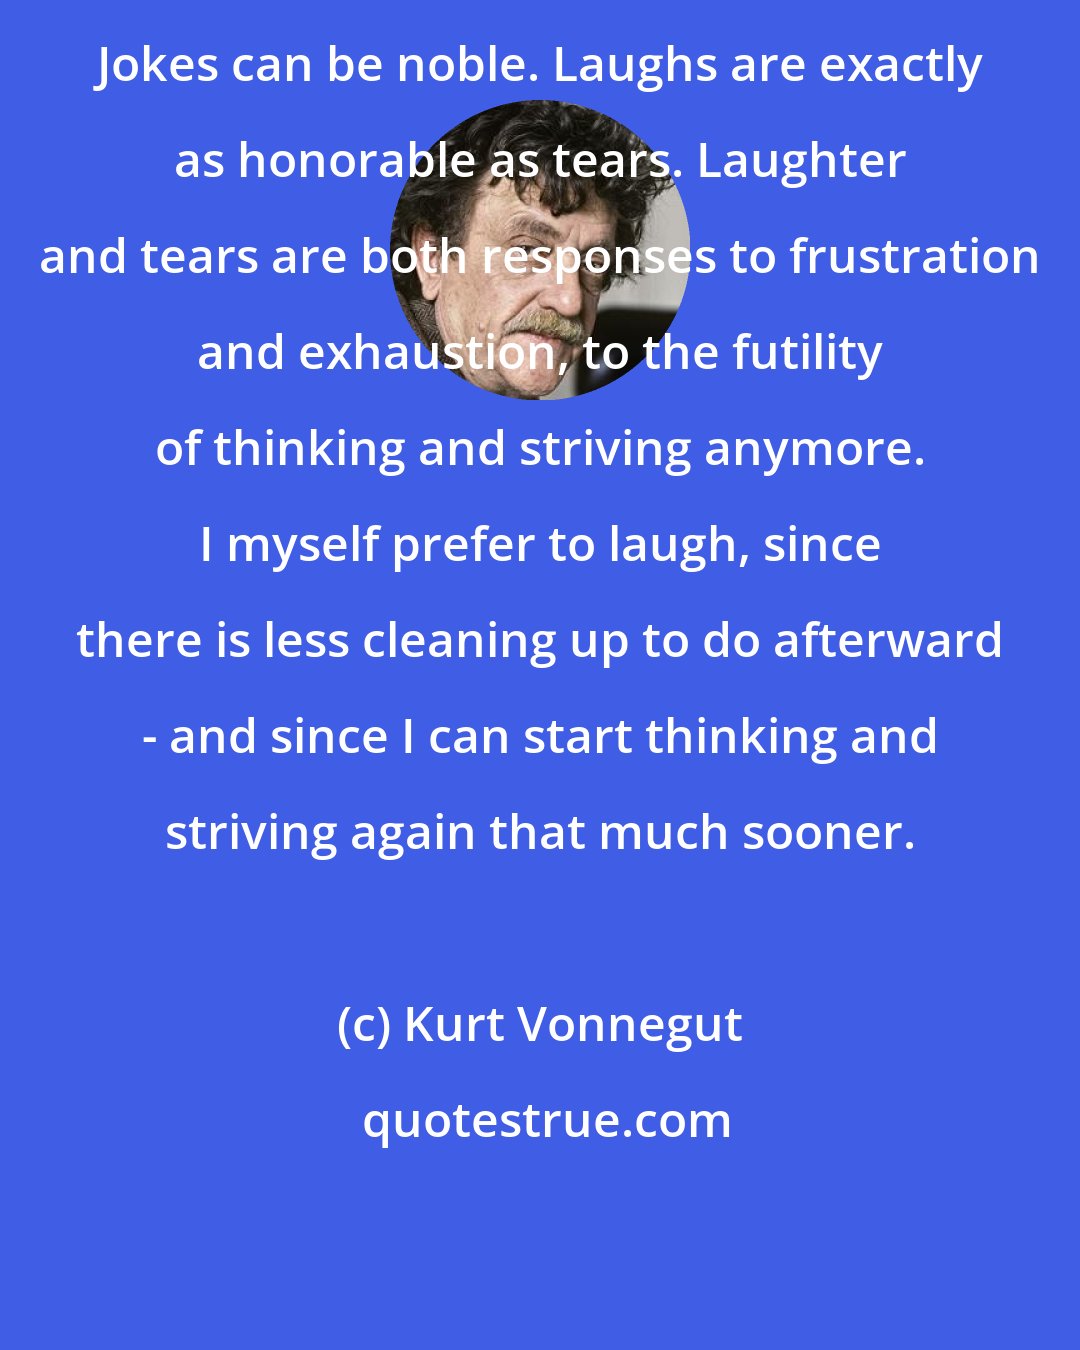 Kurt Vonnegut: Jokes can be noble. Laughs are exactly as honorable as tears. Laughter and tears are both responses to frustration and exhaustion, to the futility of thinking and striving anymore. I myself prefer to laugh, since there is less cleaning up to do afterward - and since I can start thinking and striving again that much sooner.